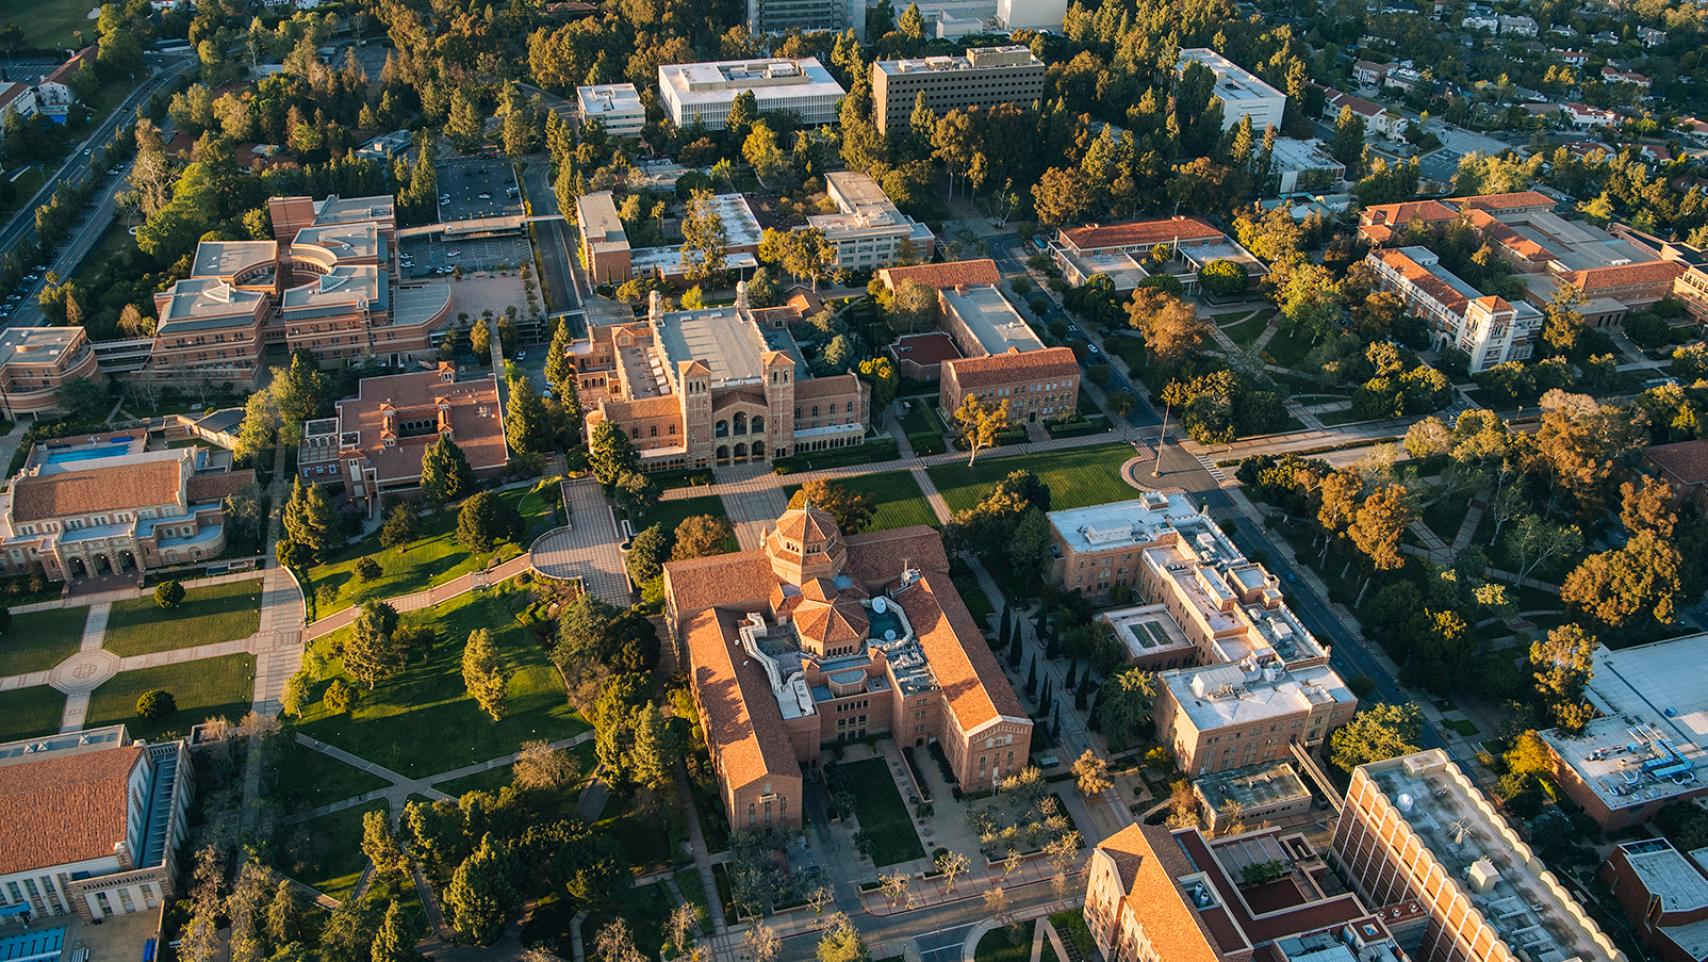 Arial view of UCLA's campus